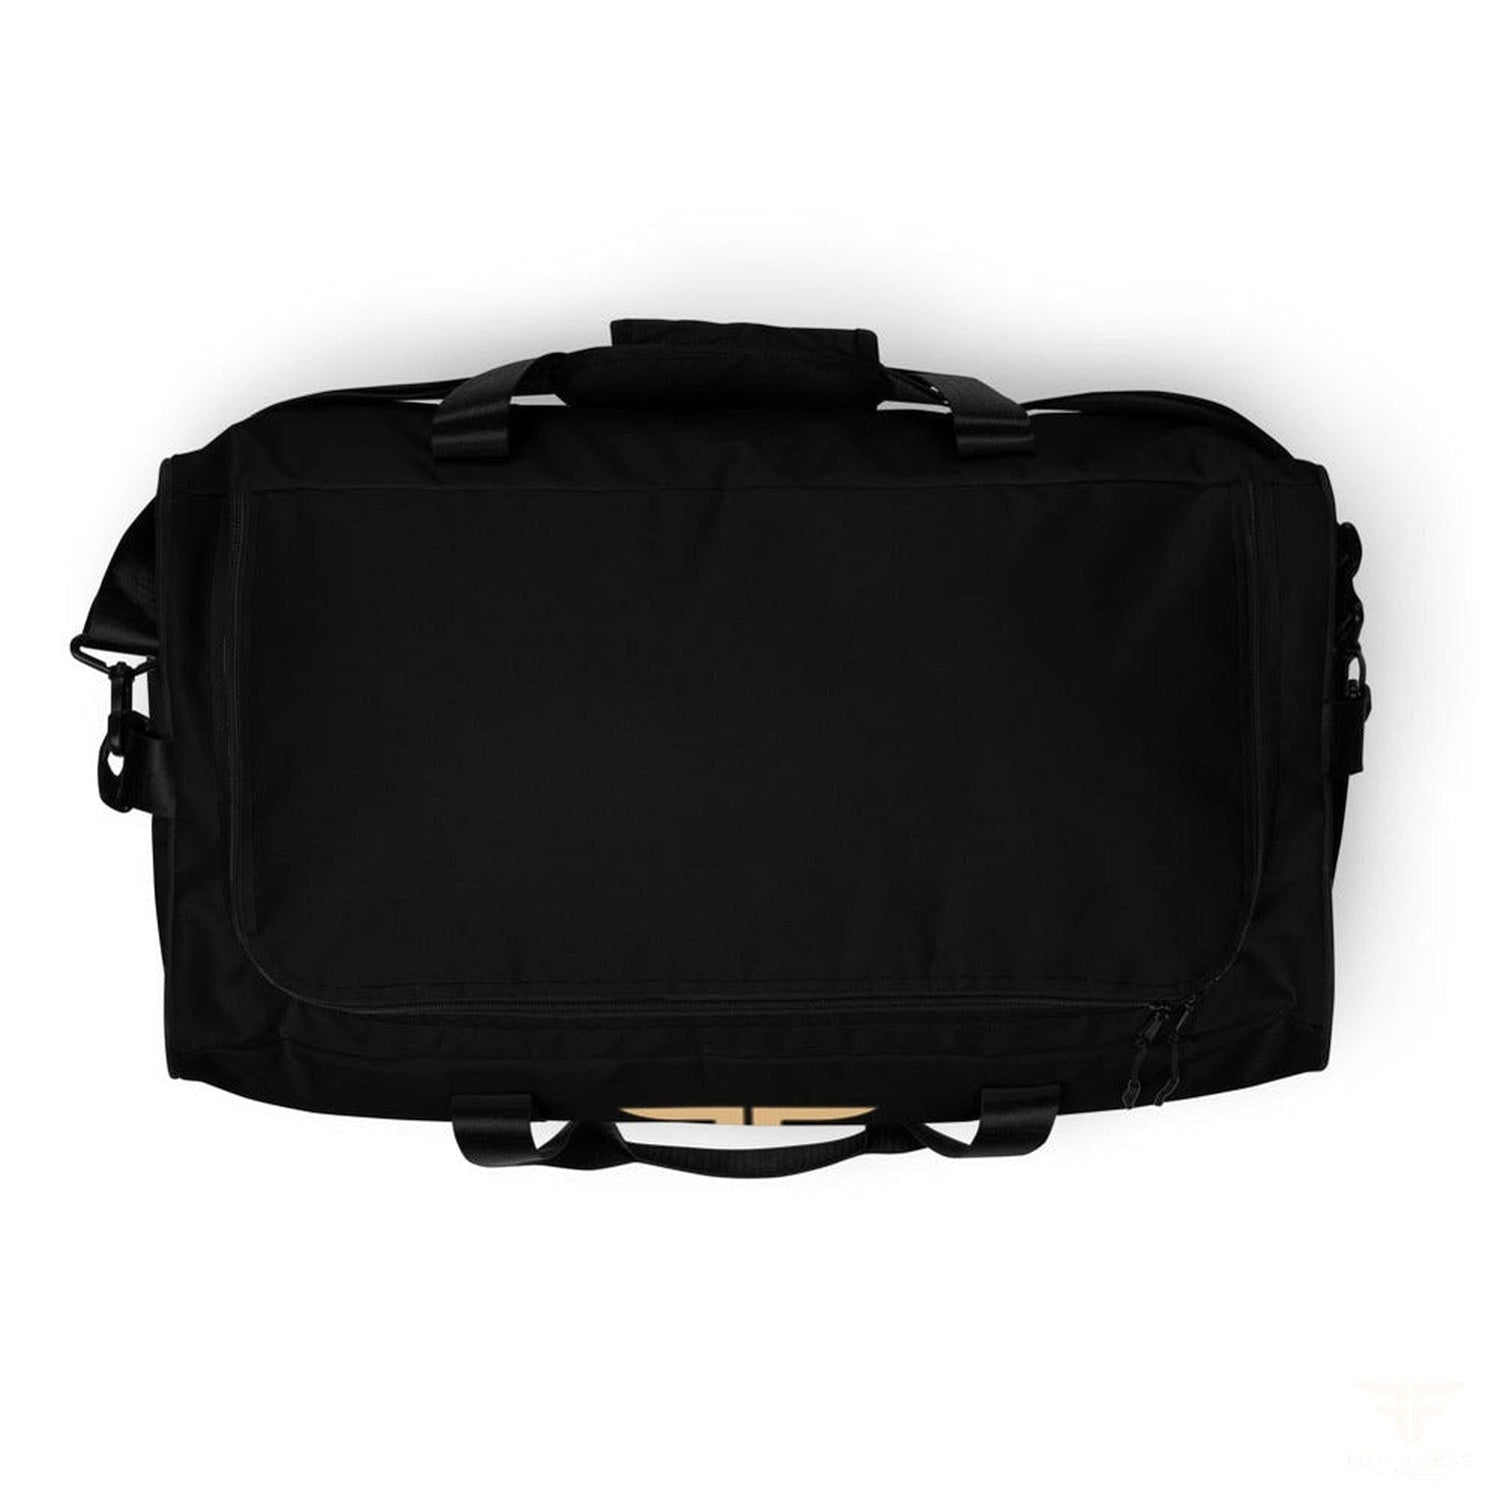 Duffle Bag - For Fathers Fitness